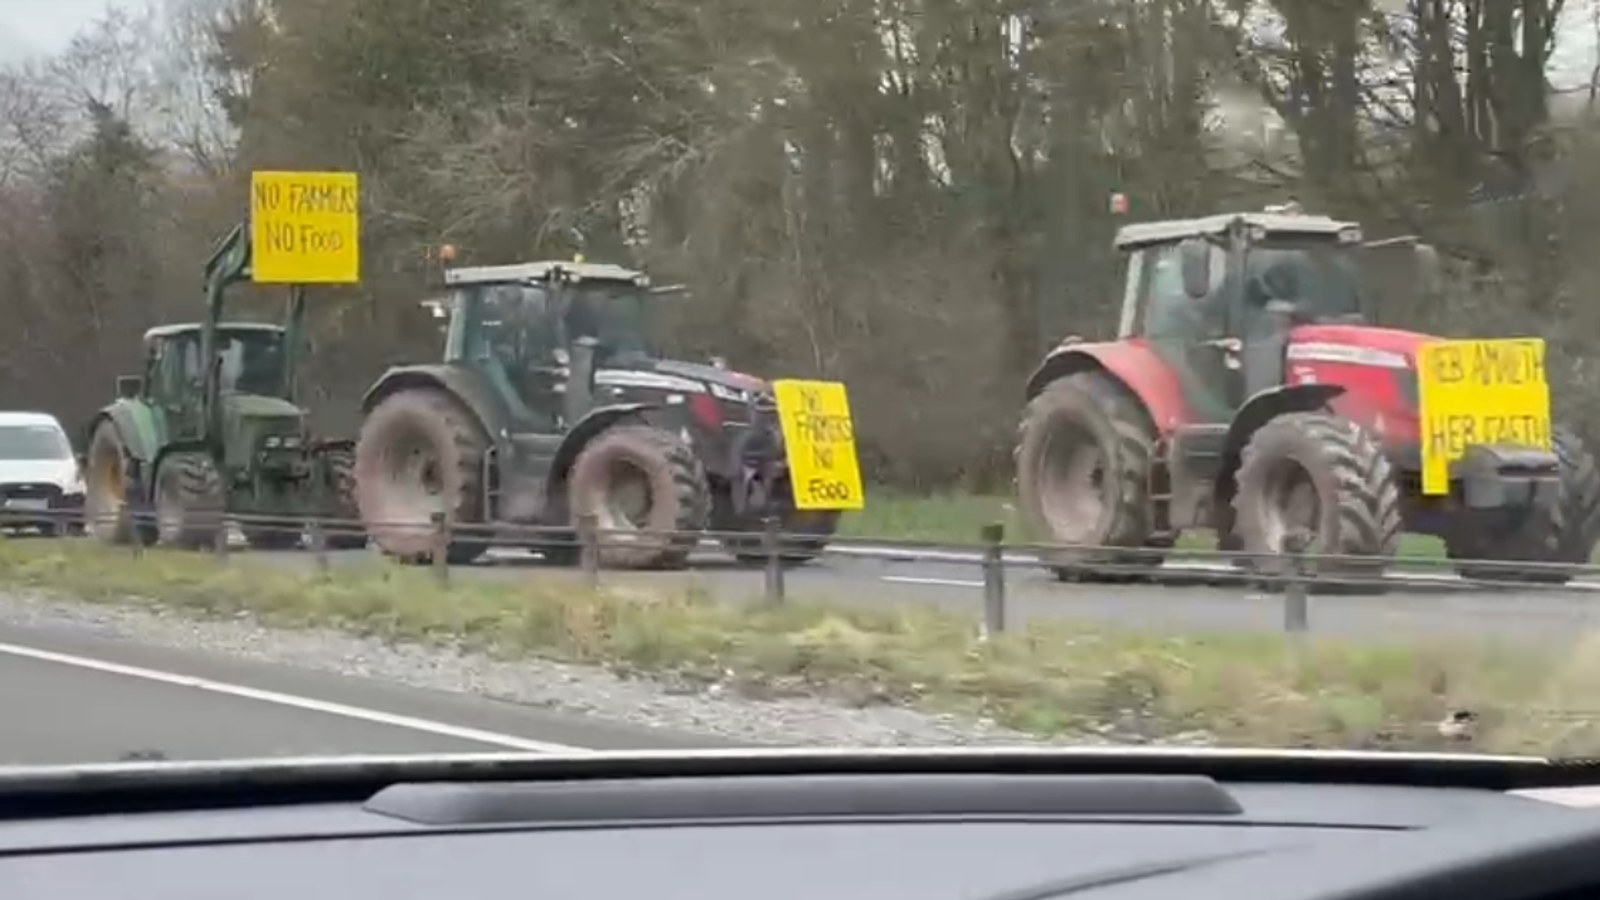 Police tell farmers not to bring tractors to Cardiff protest